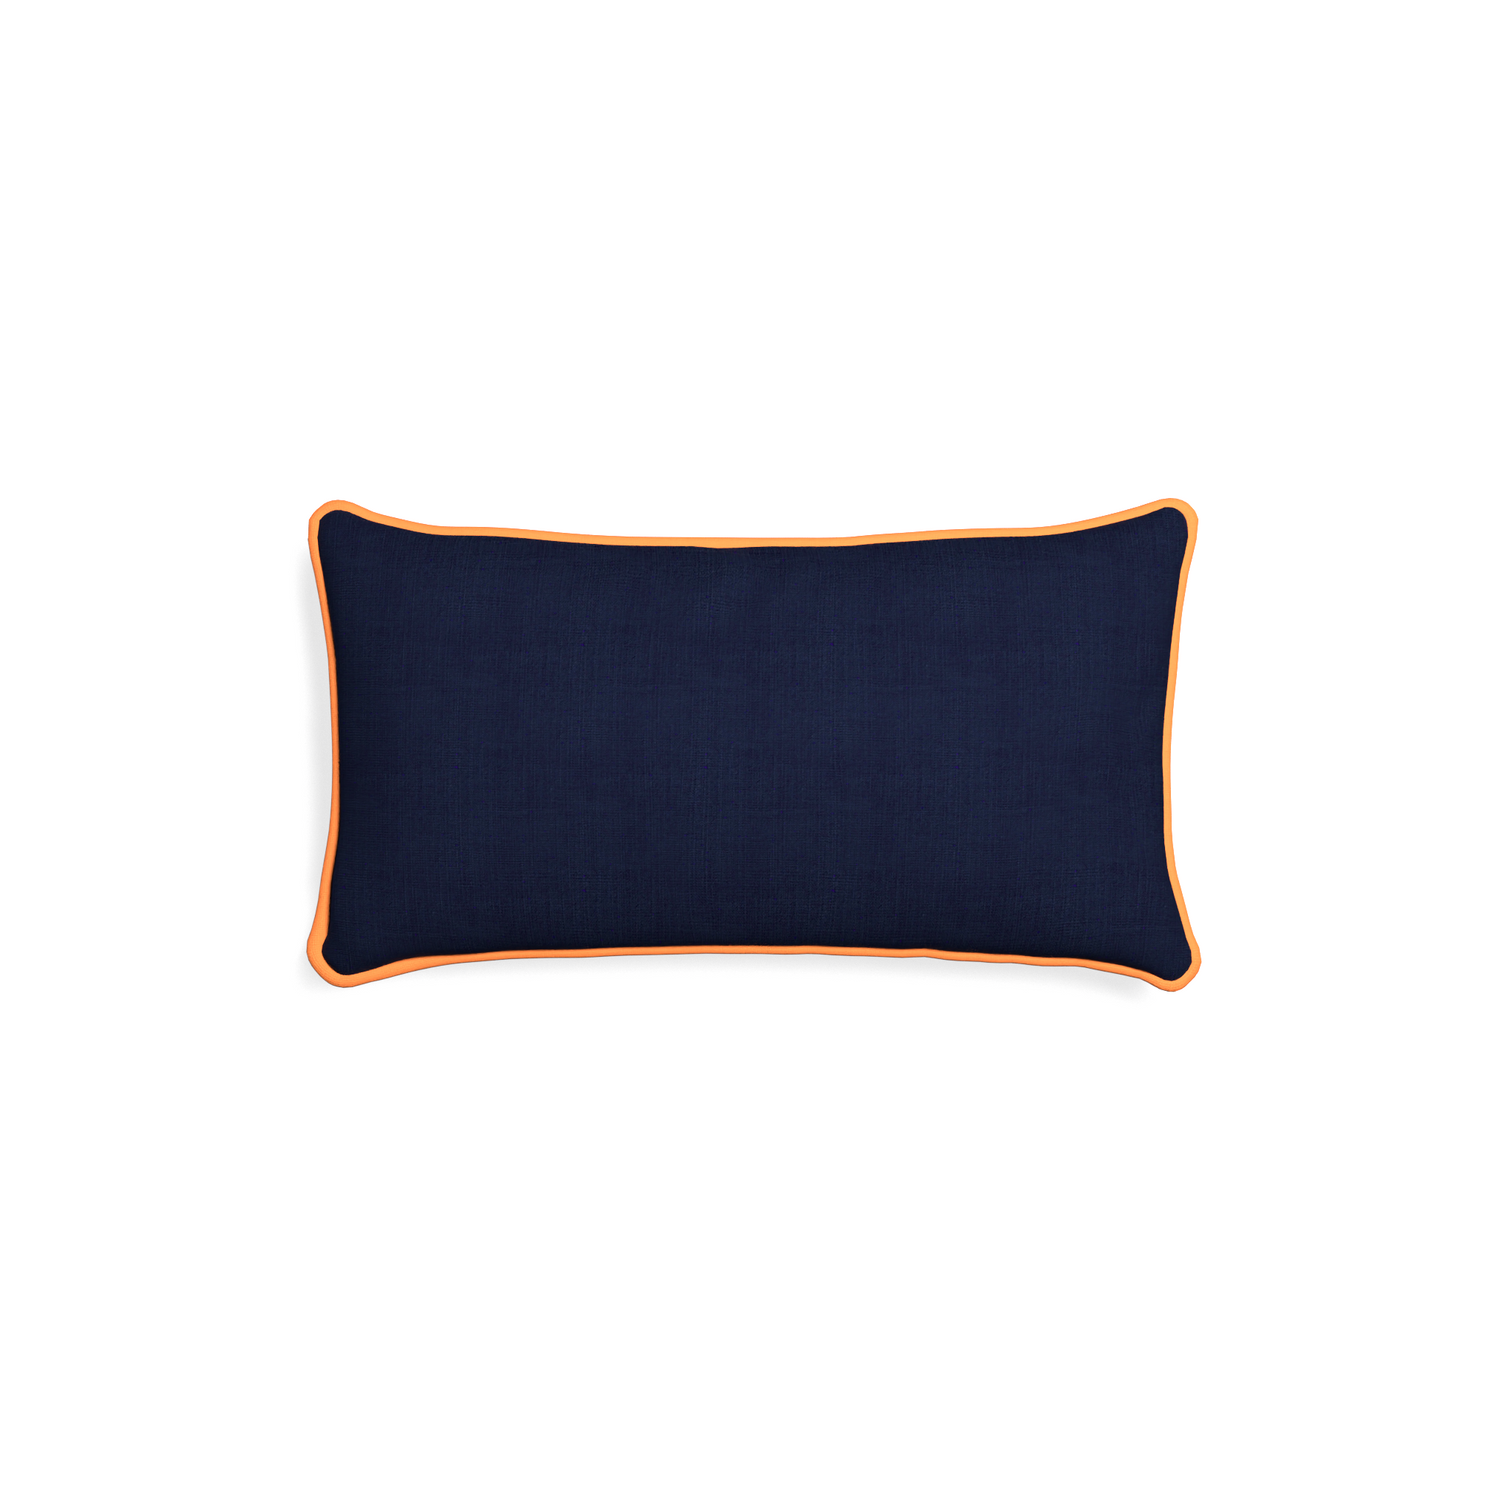 Petite-lumbar midnight custom navy bluepillow with clementine piping on white background